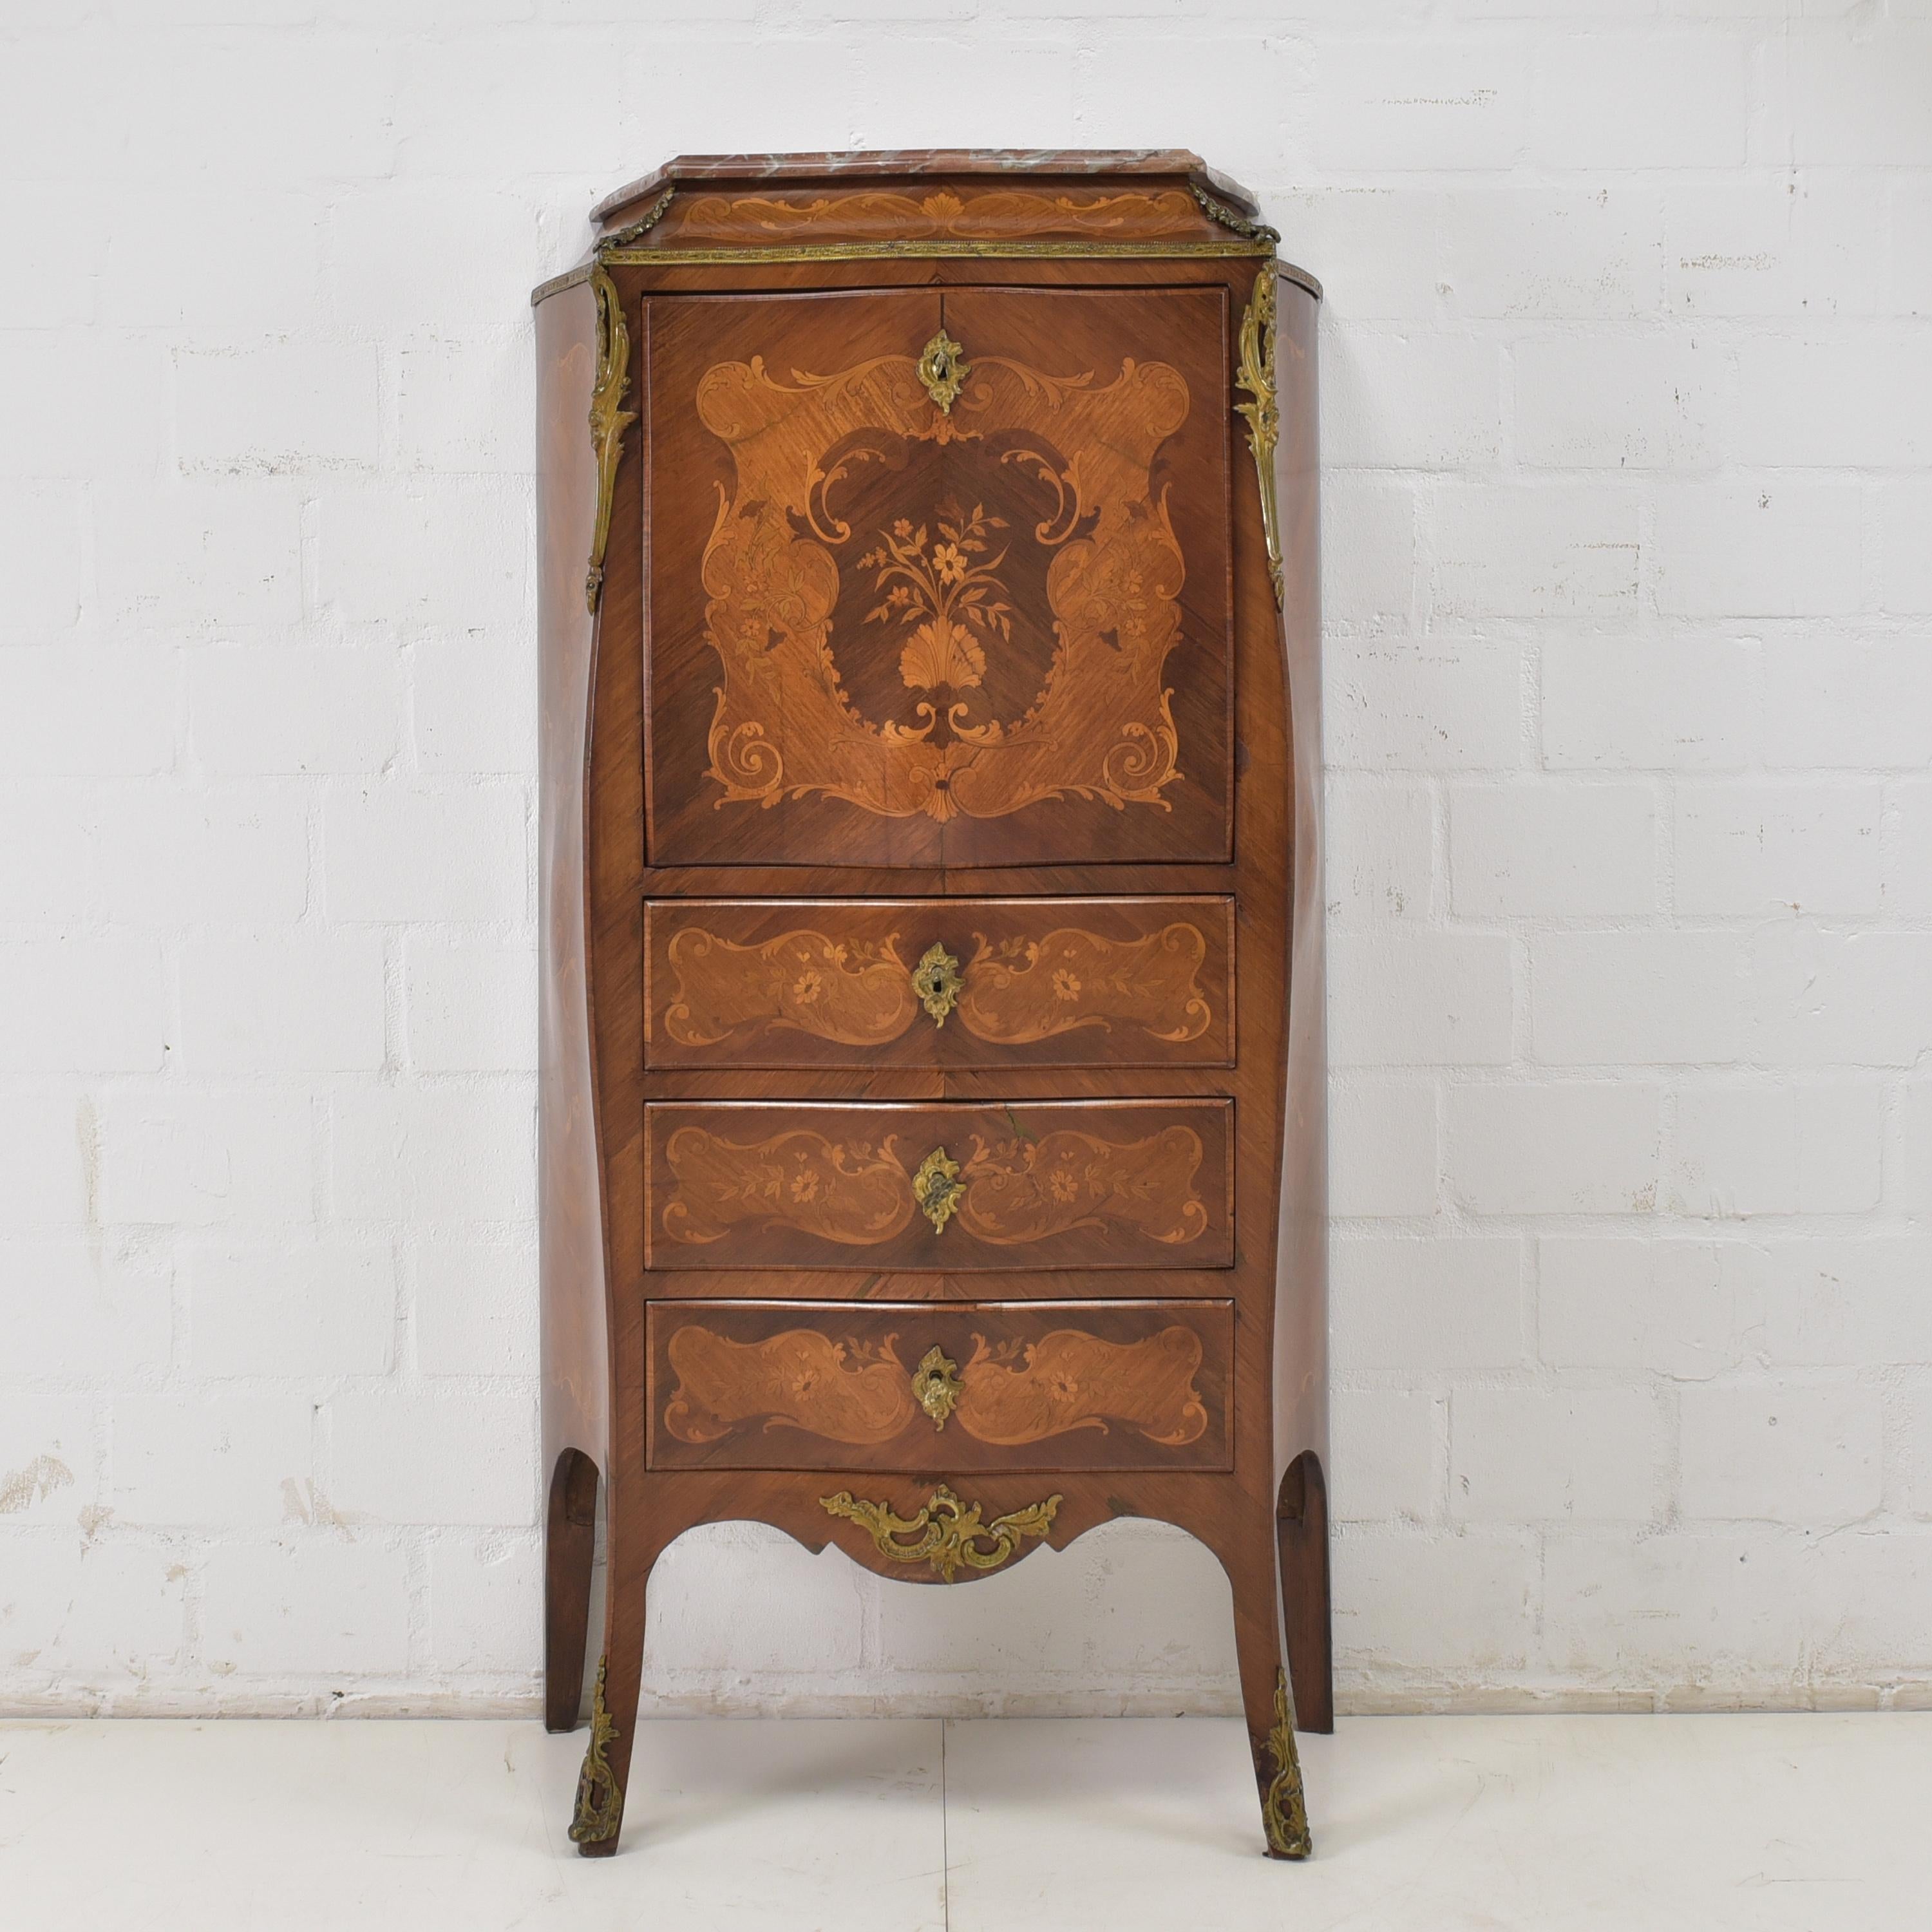 Secretary restored Louis XV style circa 1900 satinwood marquetry

Features:
Model with upright writing flap and three drawers inside and outside
Very high quality processing
Original high-quality fittings and metal applications
All drawers